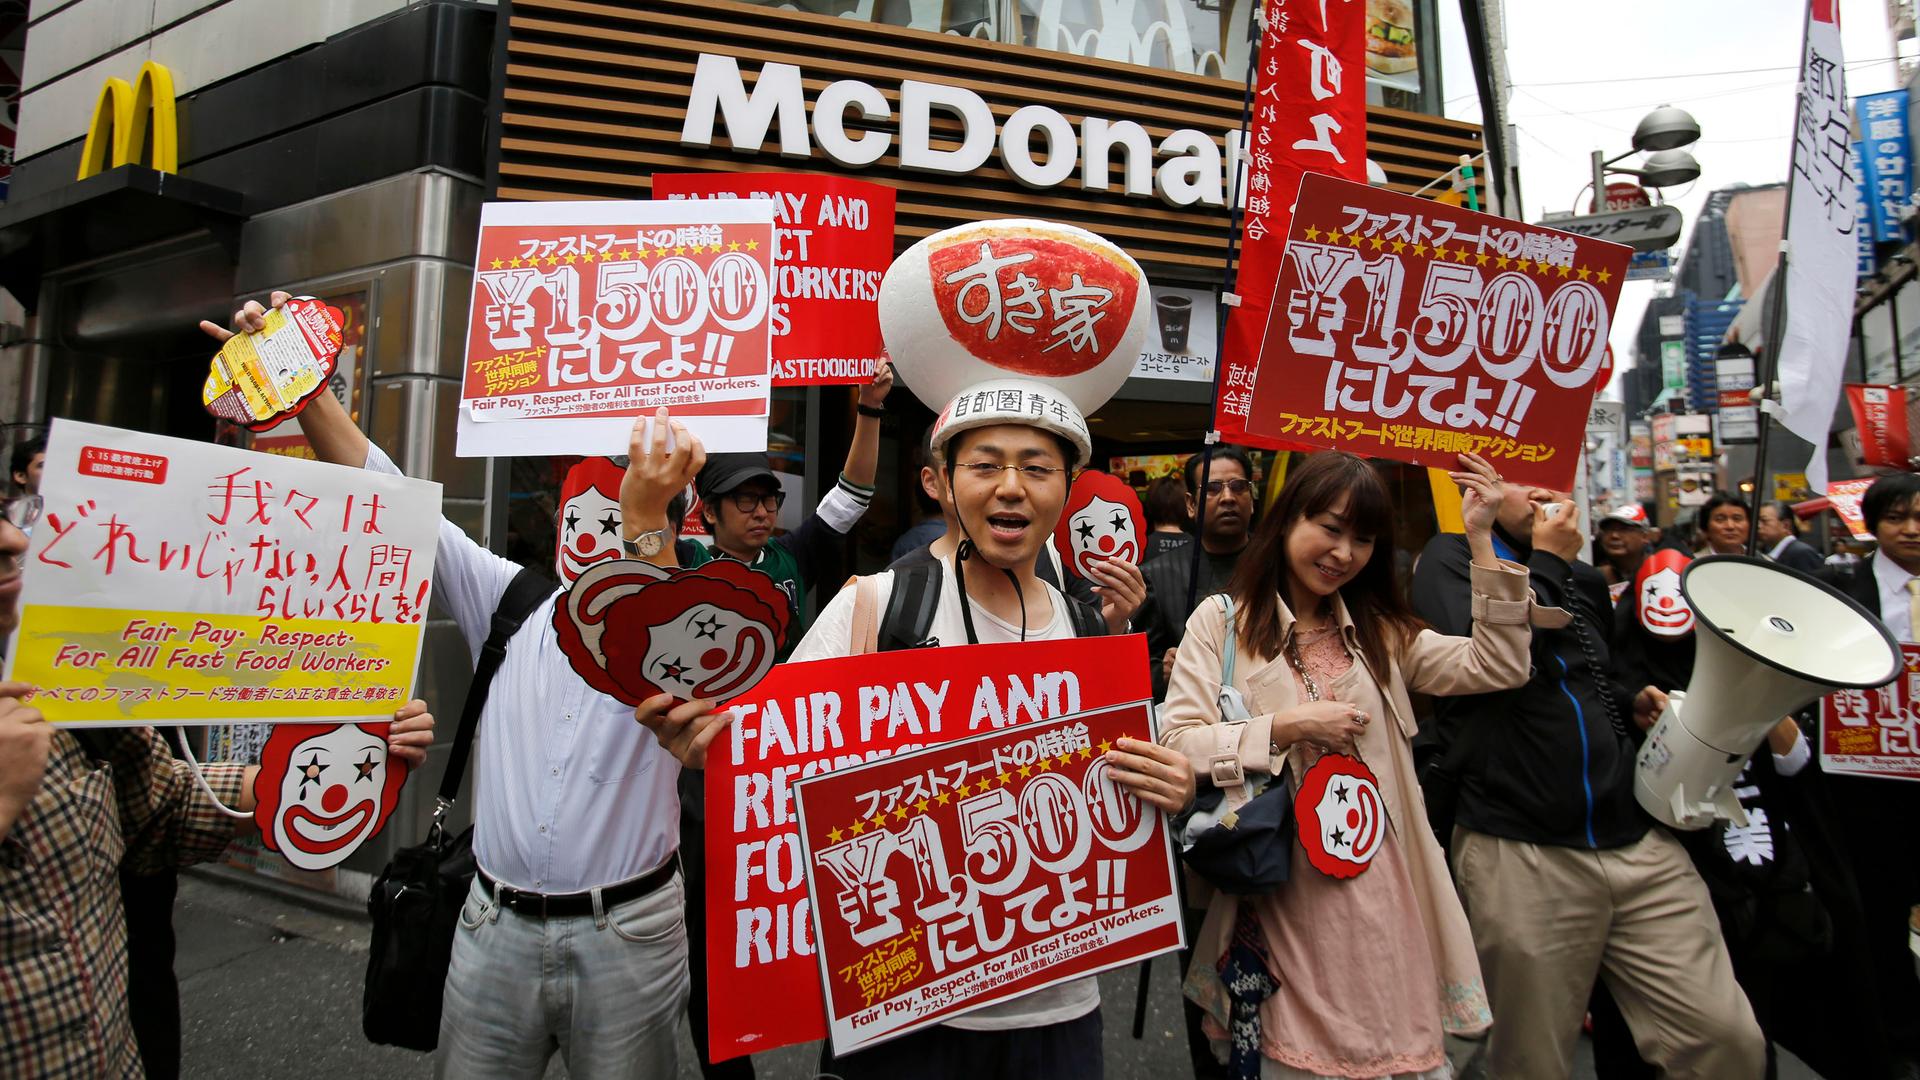 Demonstrators holding posters march during a protest to demand higher wages for fast-food workers in front of a McDonald's fast-food restaurant in Tokyo's Shibuya shopping and amusement district May 15, 2014. 